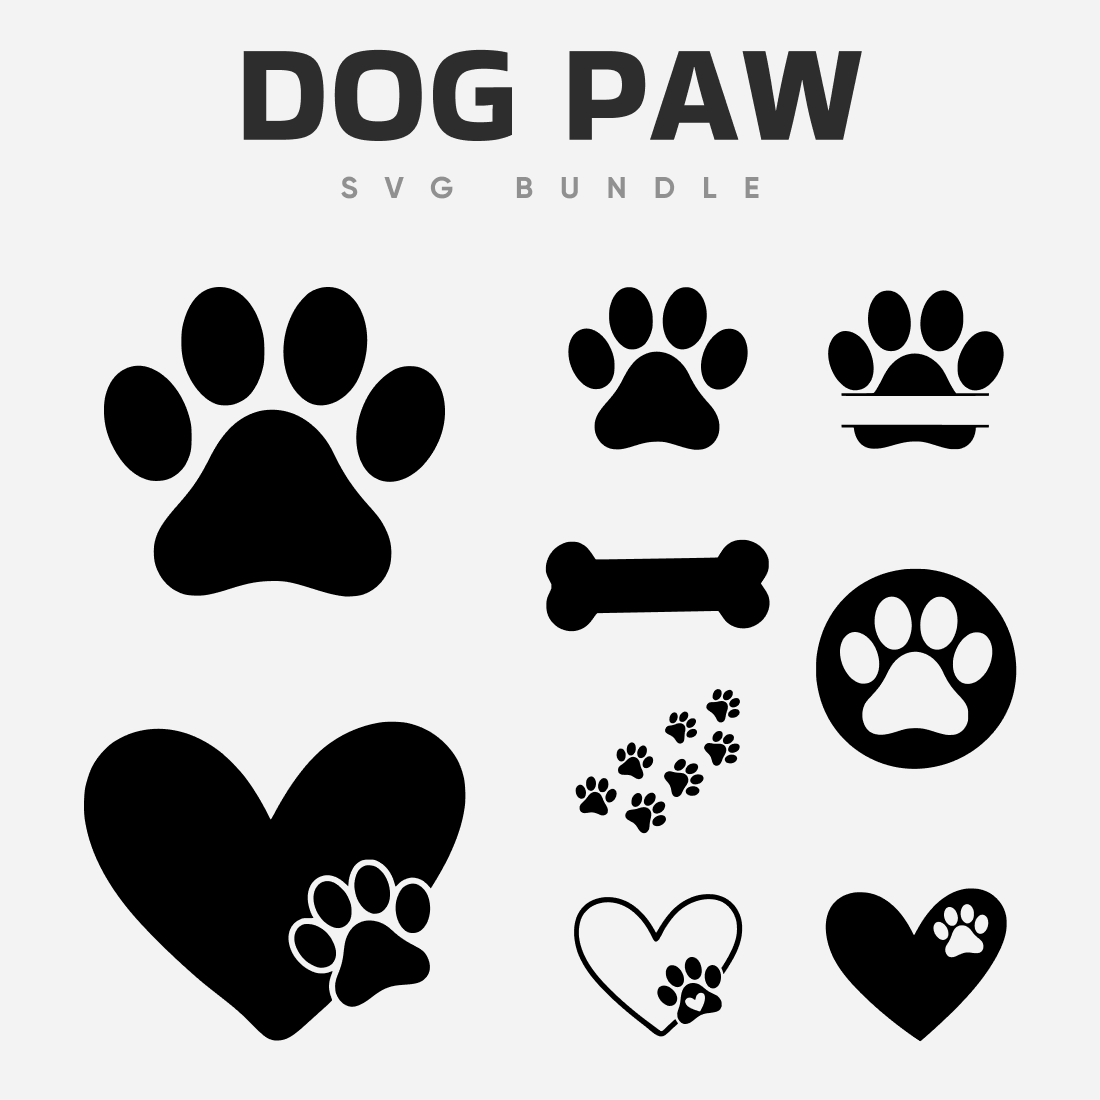 Drawings of dog paws of different sizes.